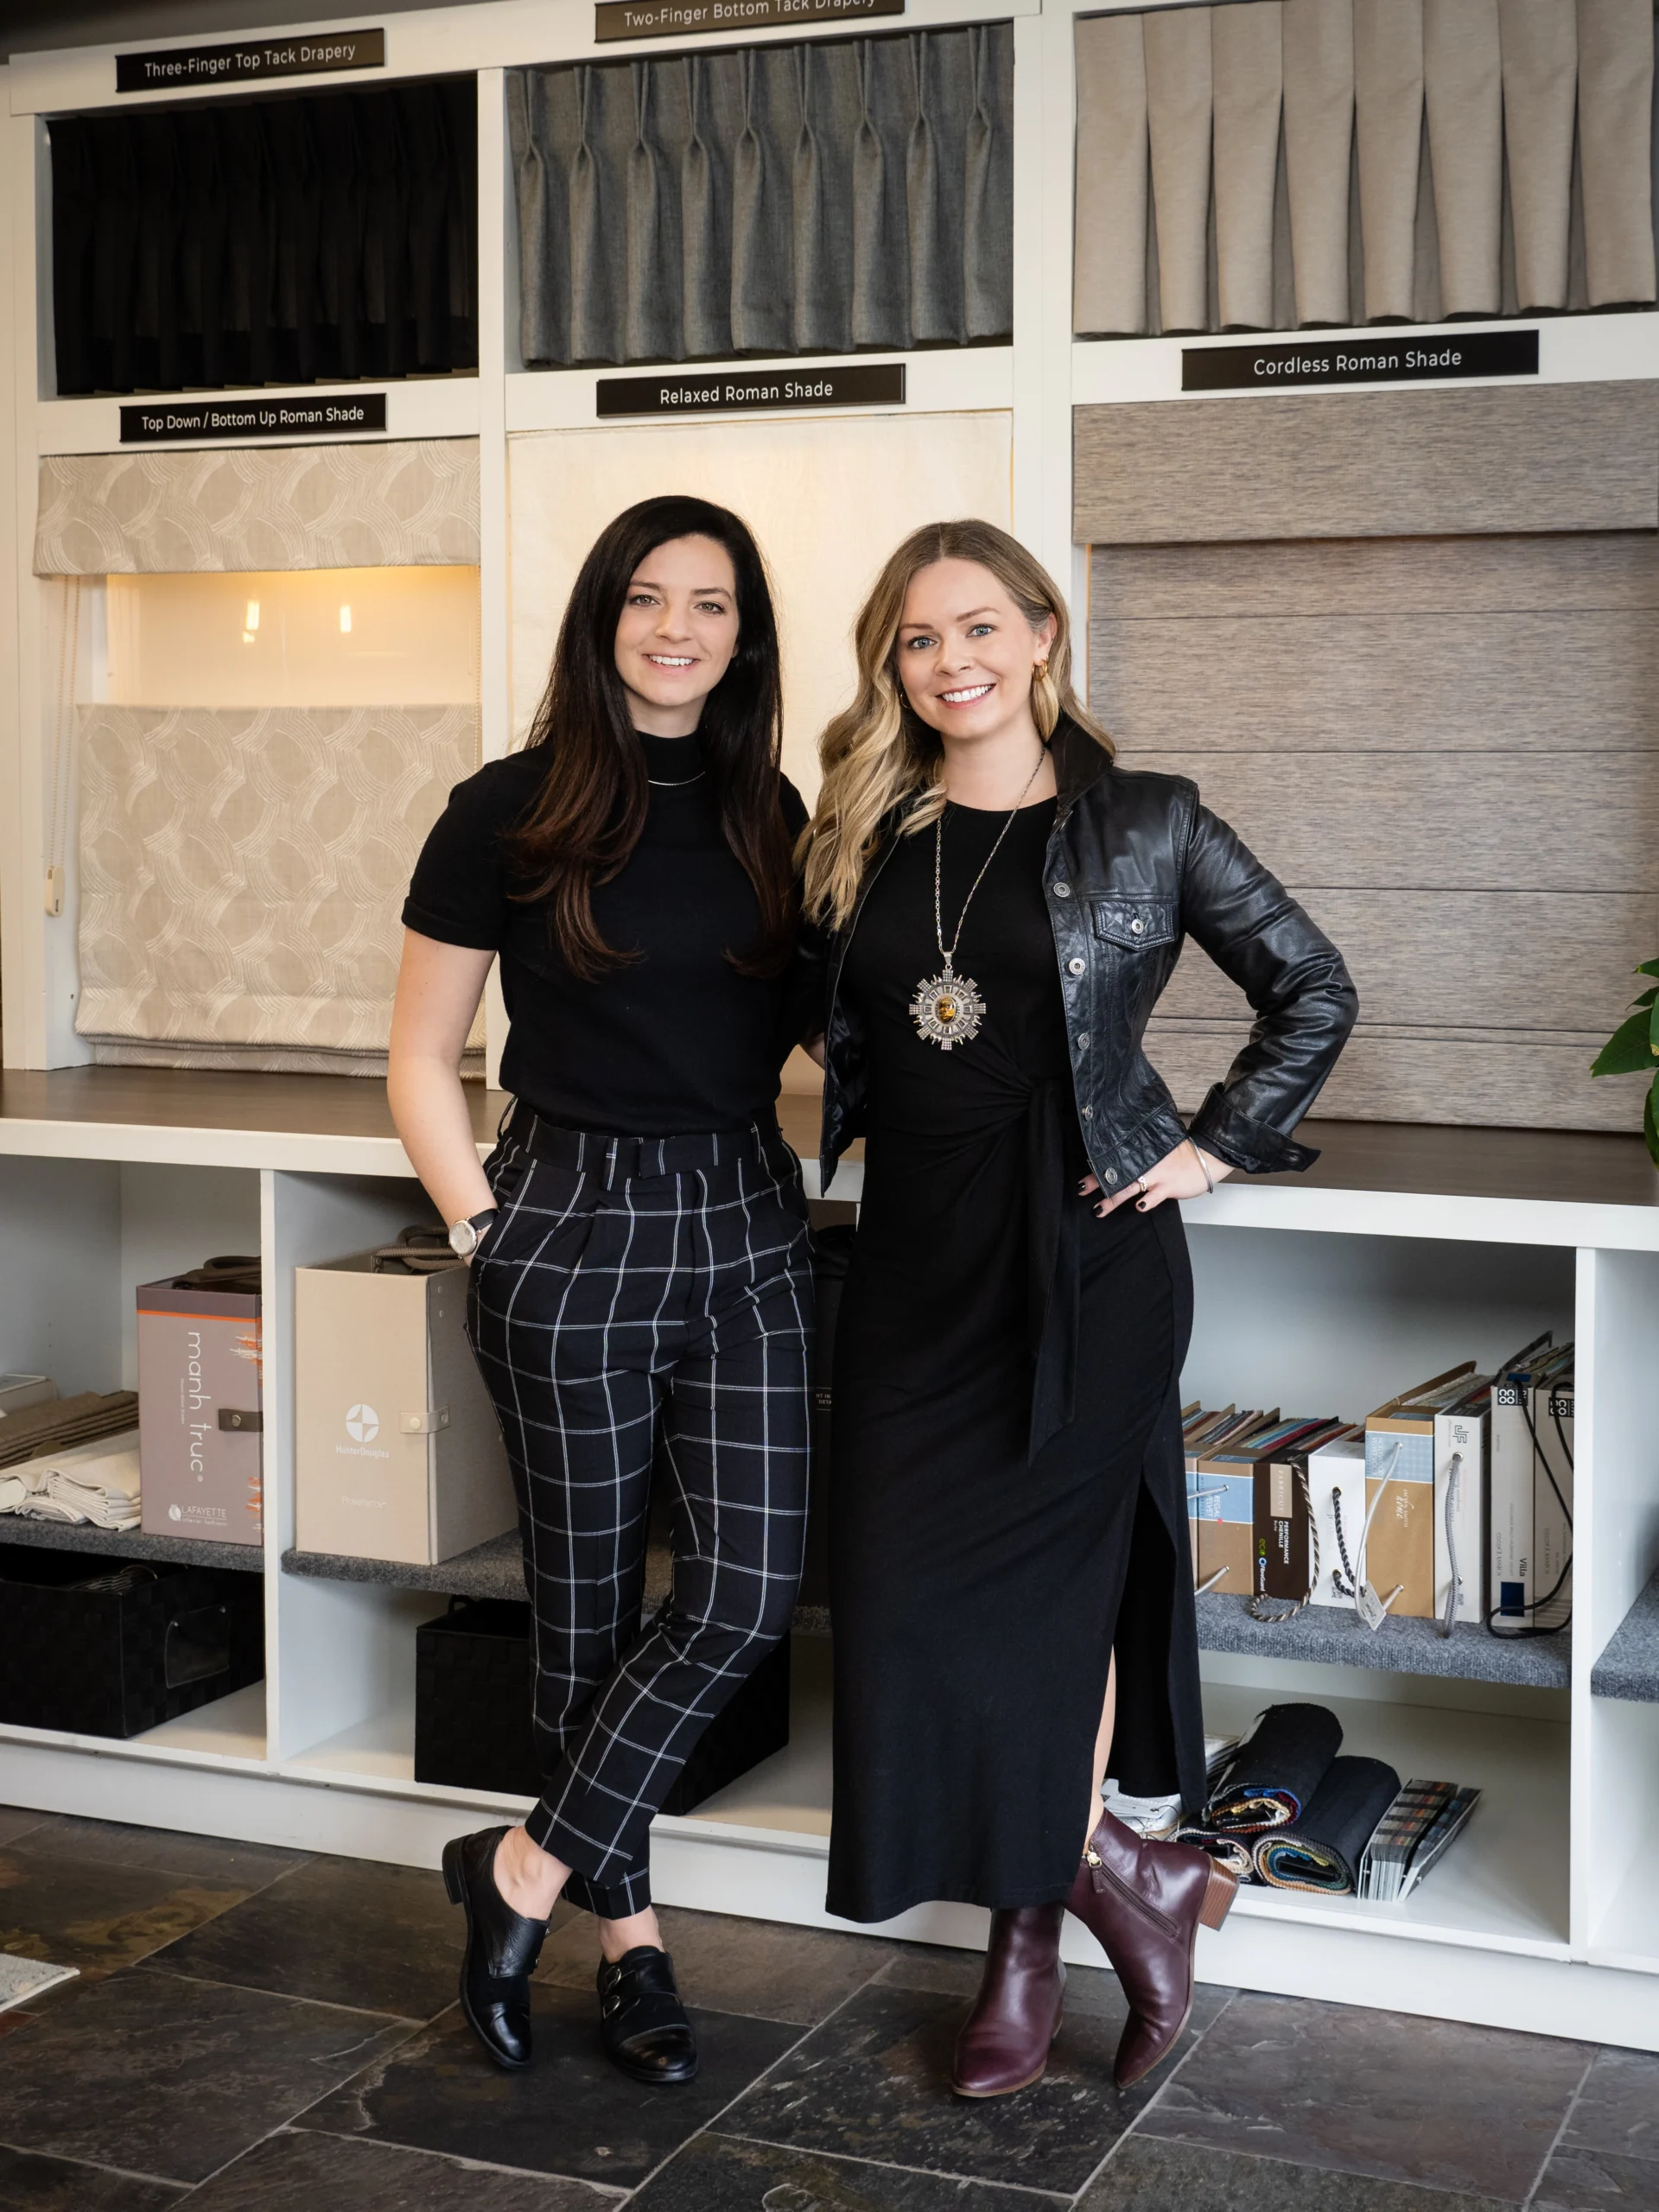 Two women standing in a Colorado showroom with various blinds and window treatment samples displayed behind them. One wears a black outfit, and the other a black dress with a leather jacket.